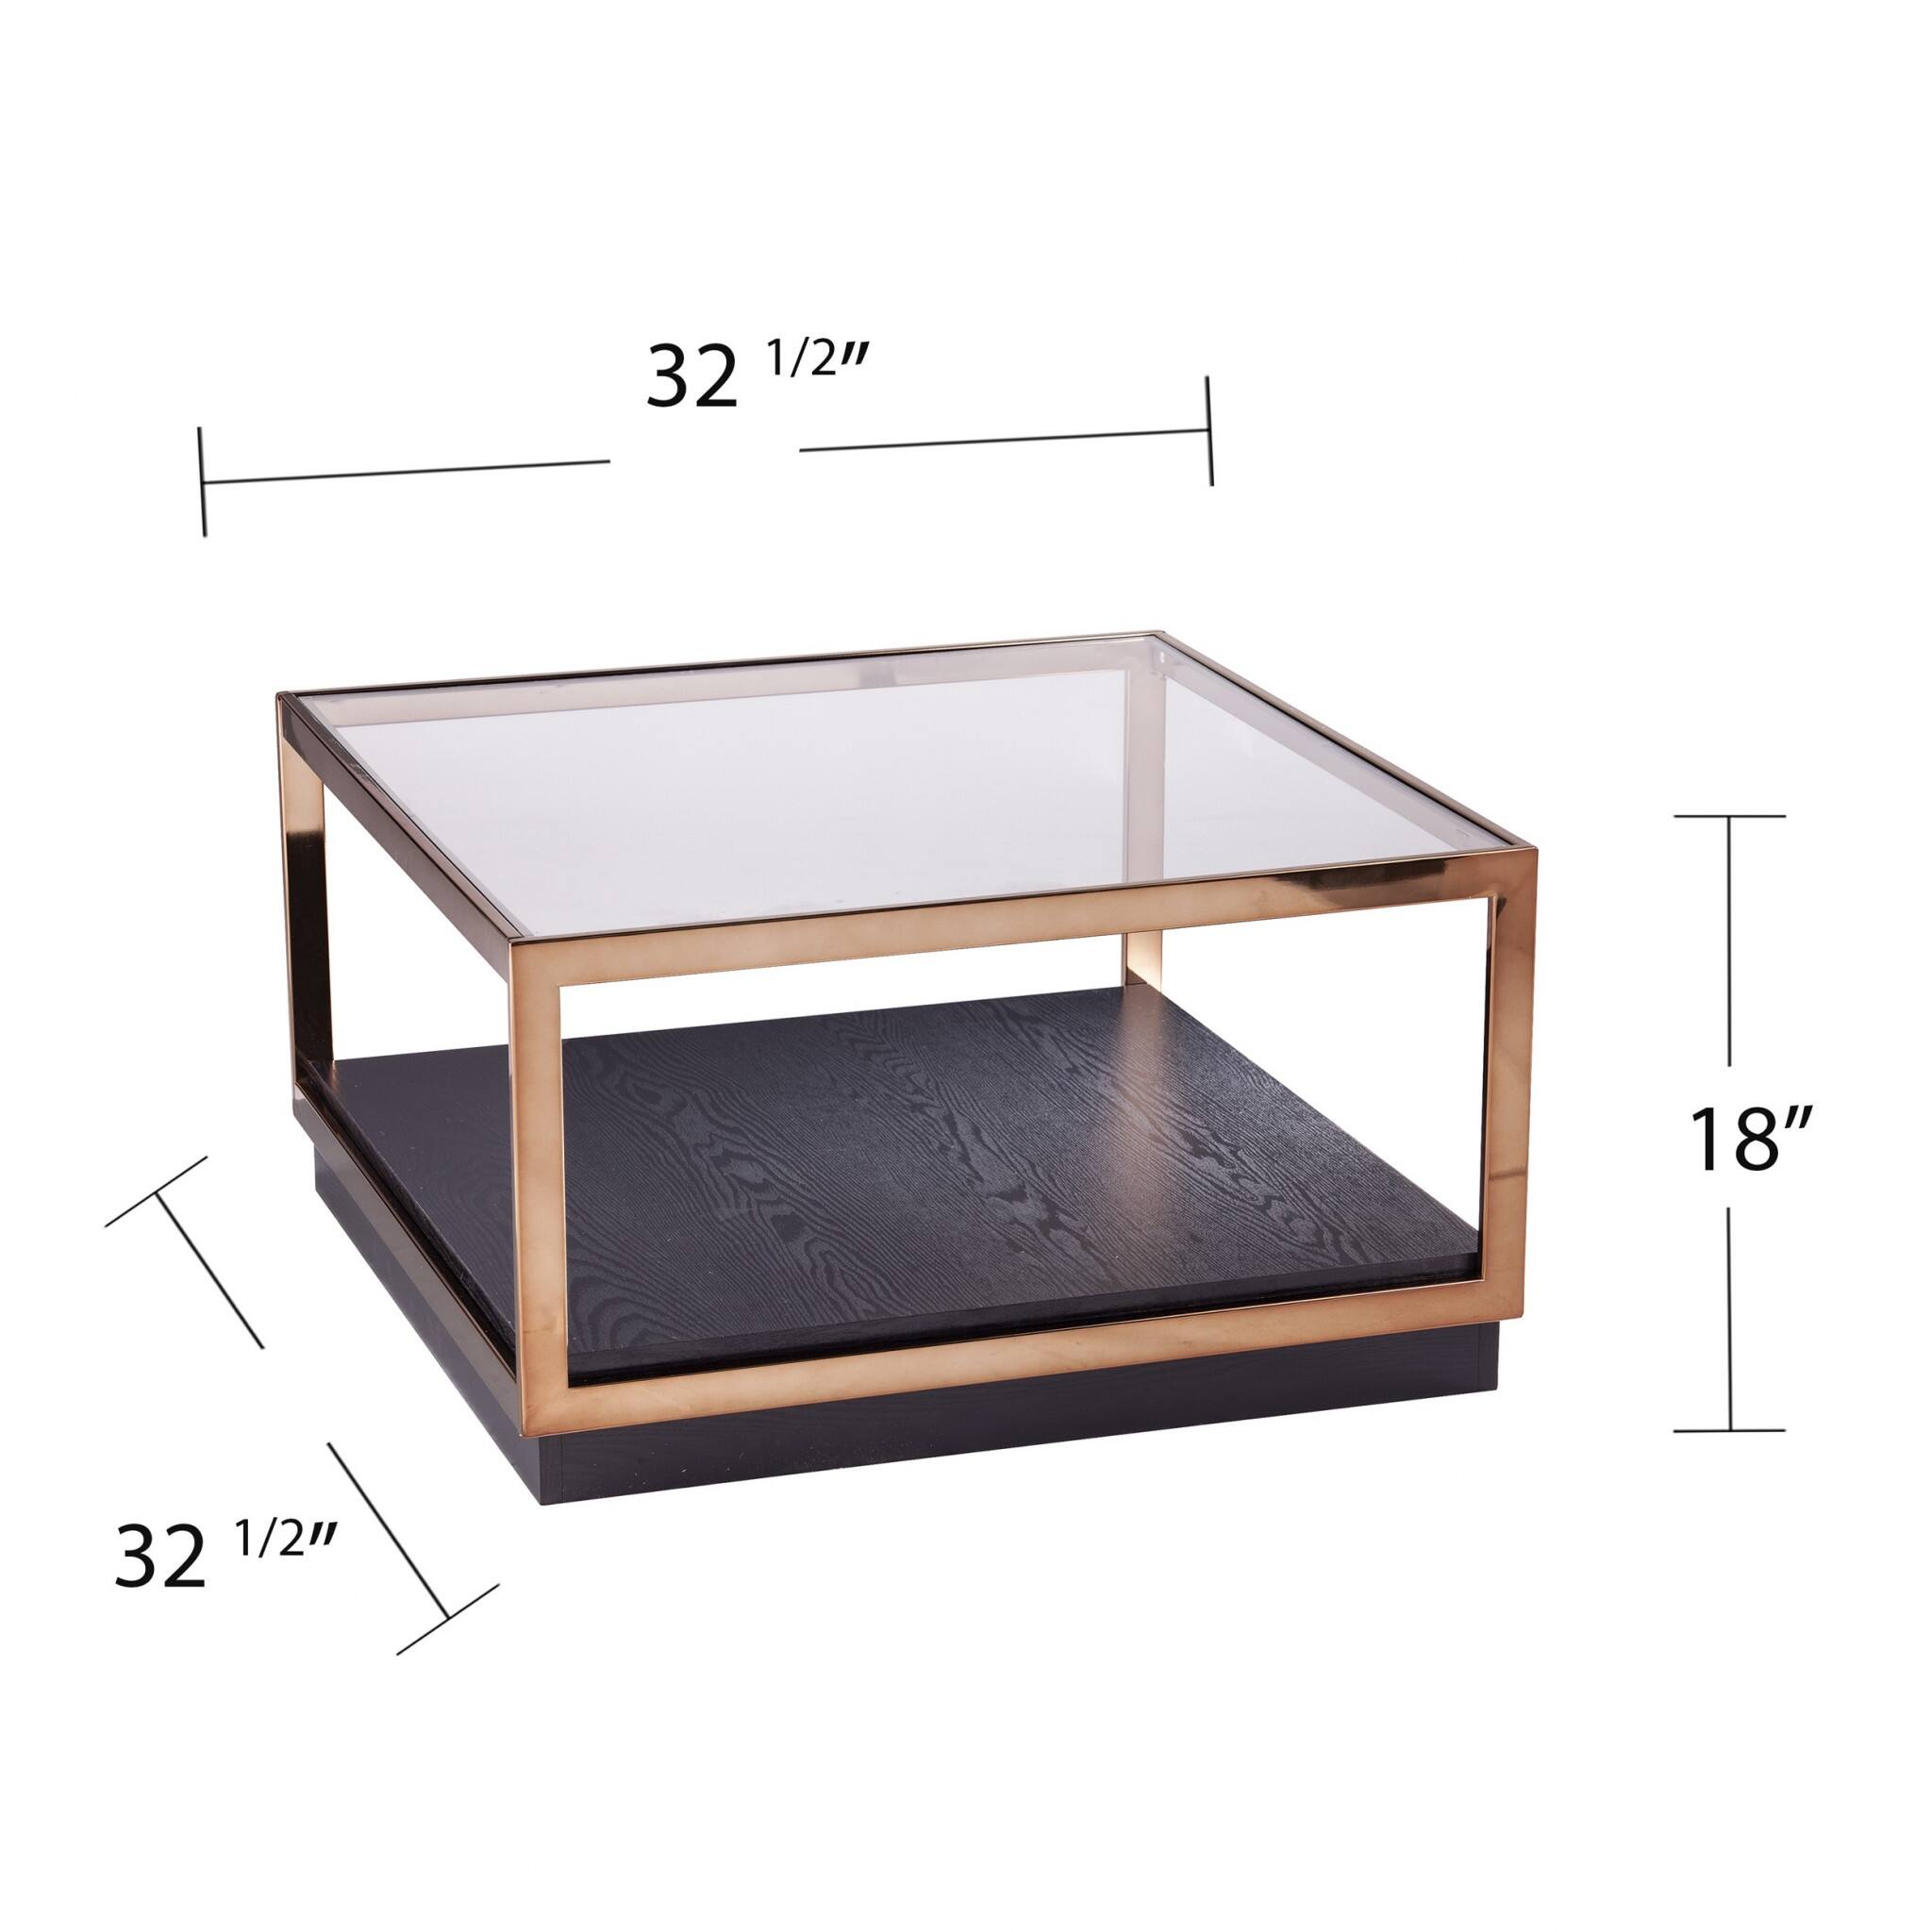 33" Champagne Glass And Solid Manufactured Wood Square Coffee Table - 18" H x 32.5" W x 32.5" D - 18" H x 32.5" W x 32.5" D